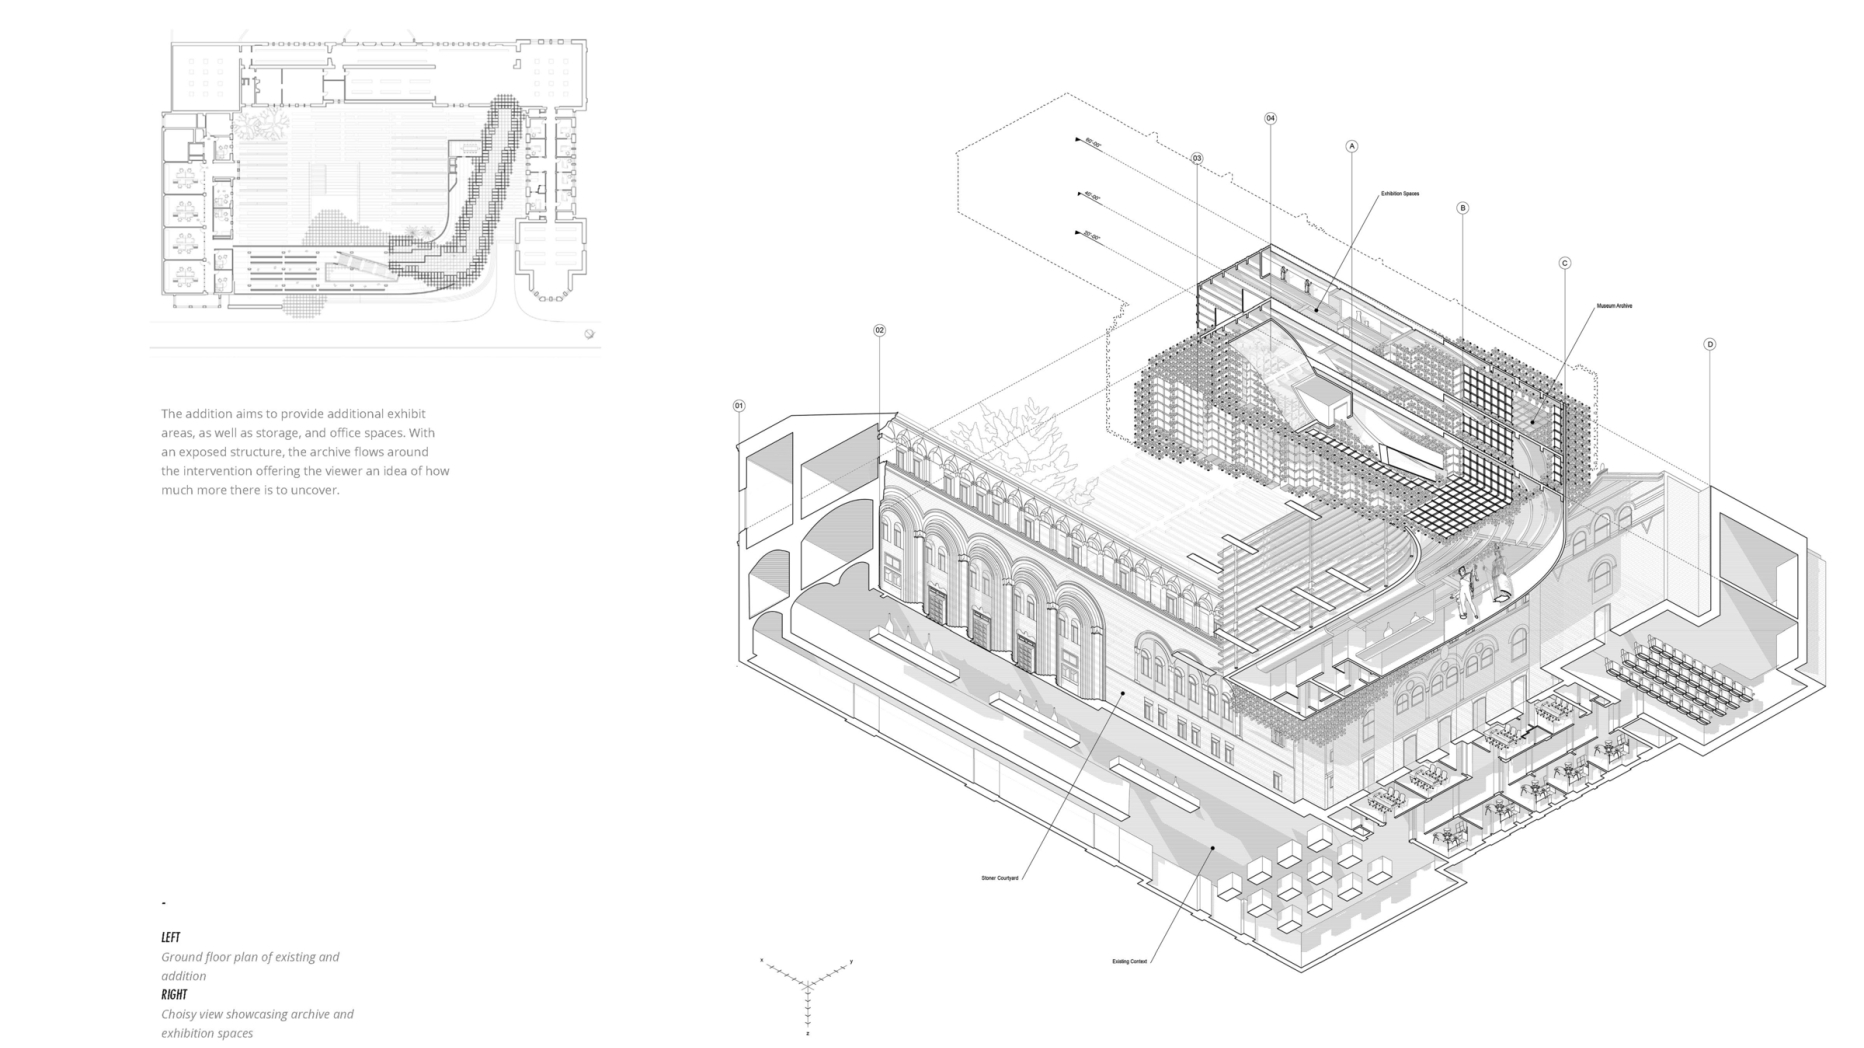 Ground floor plan and choisy view showing lattice like addition to museum building